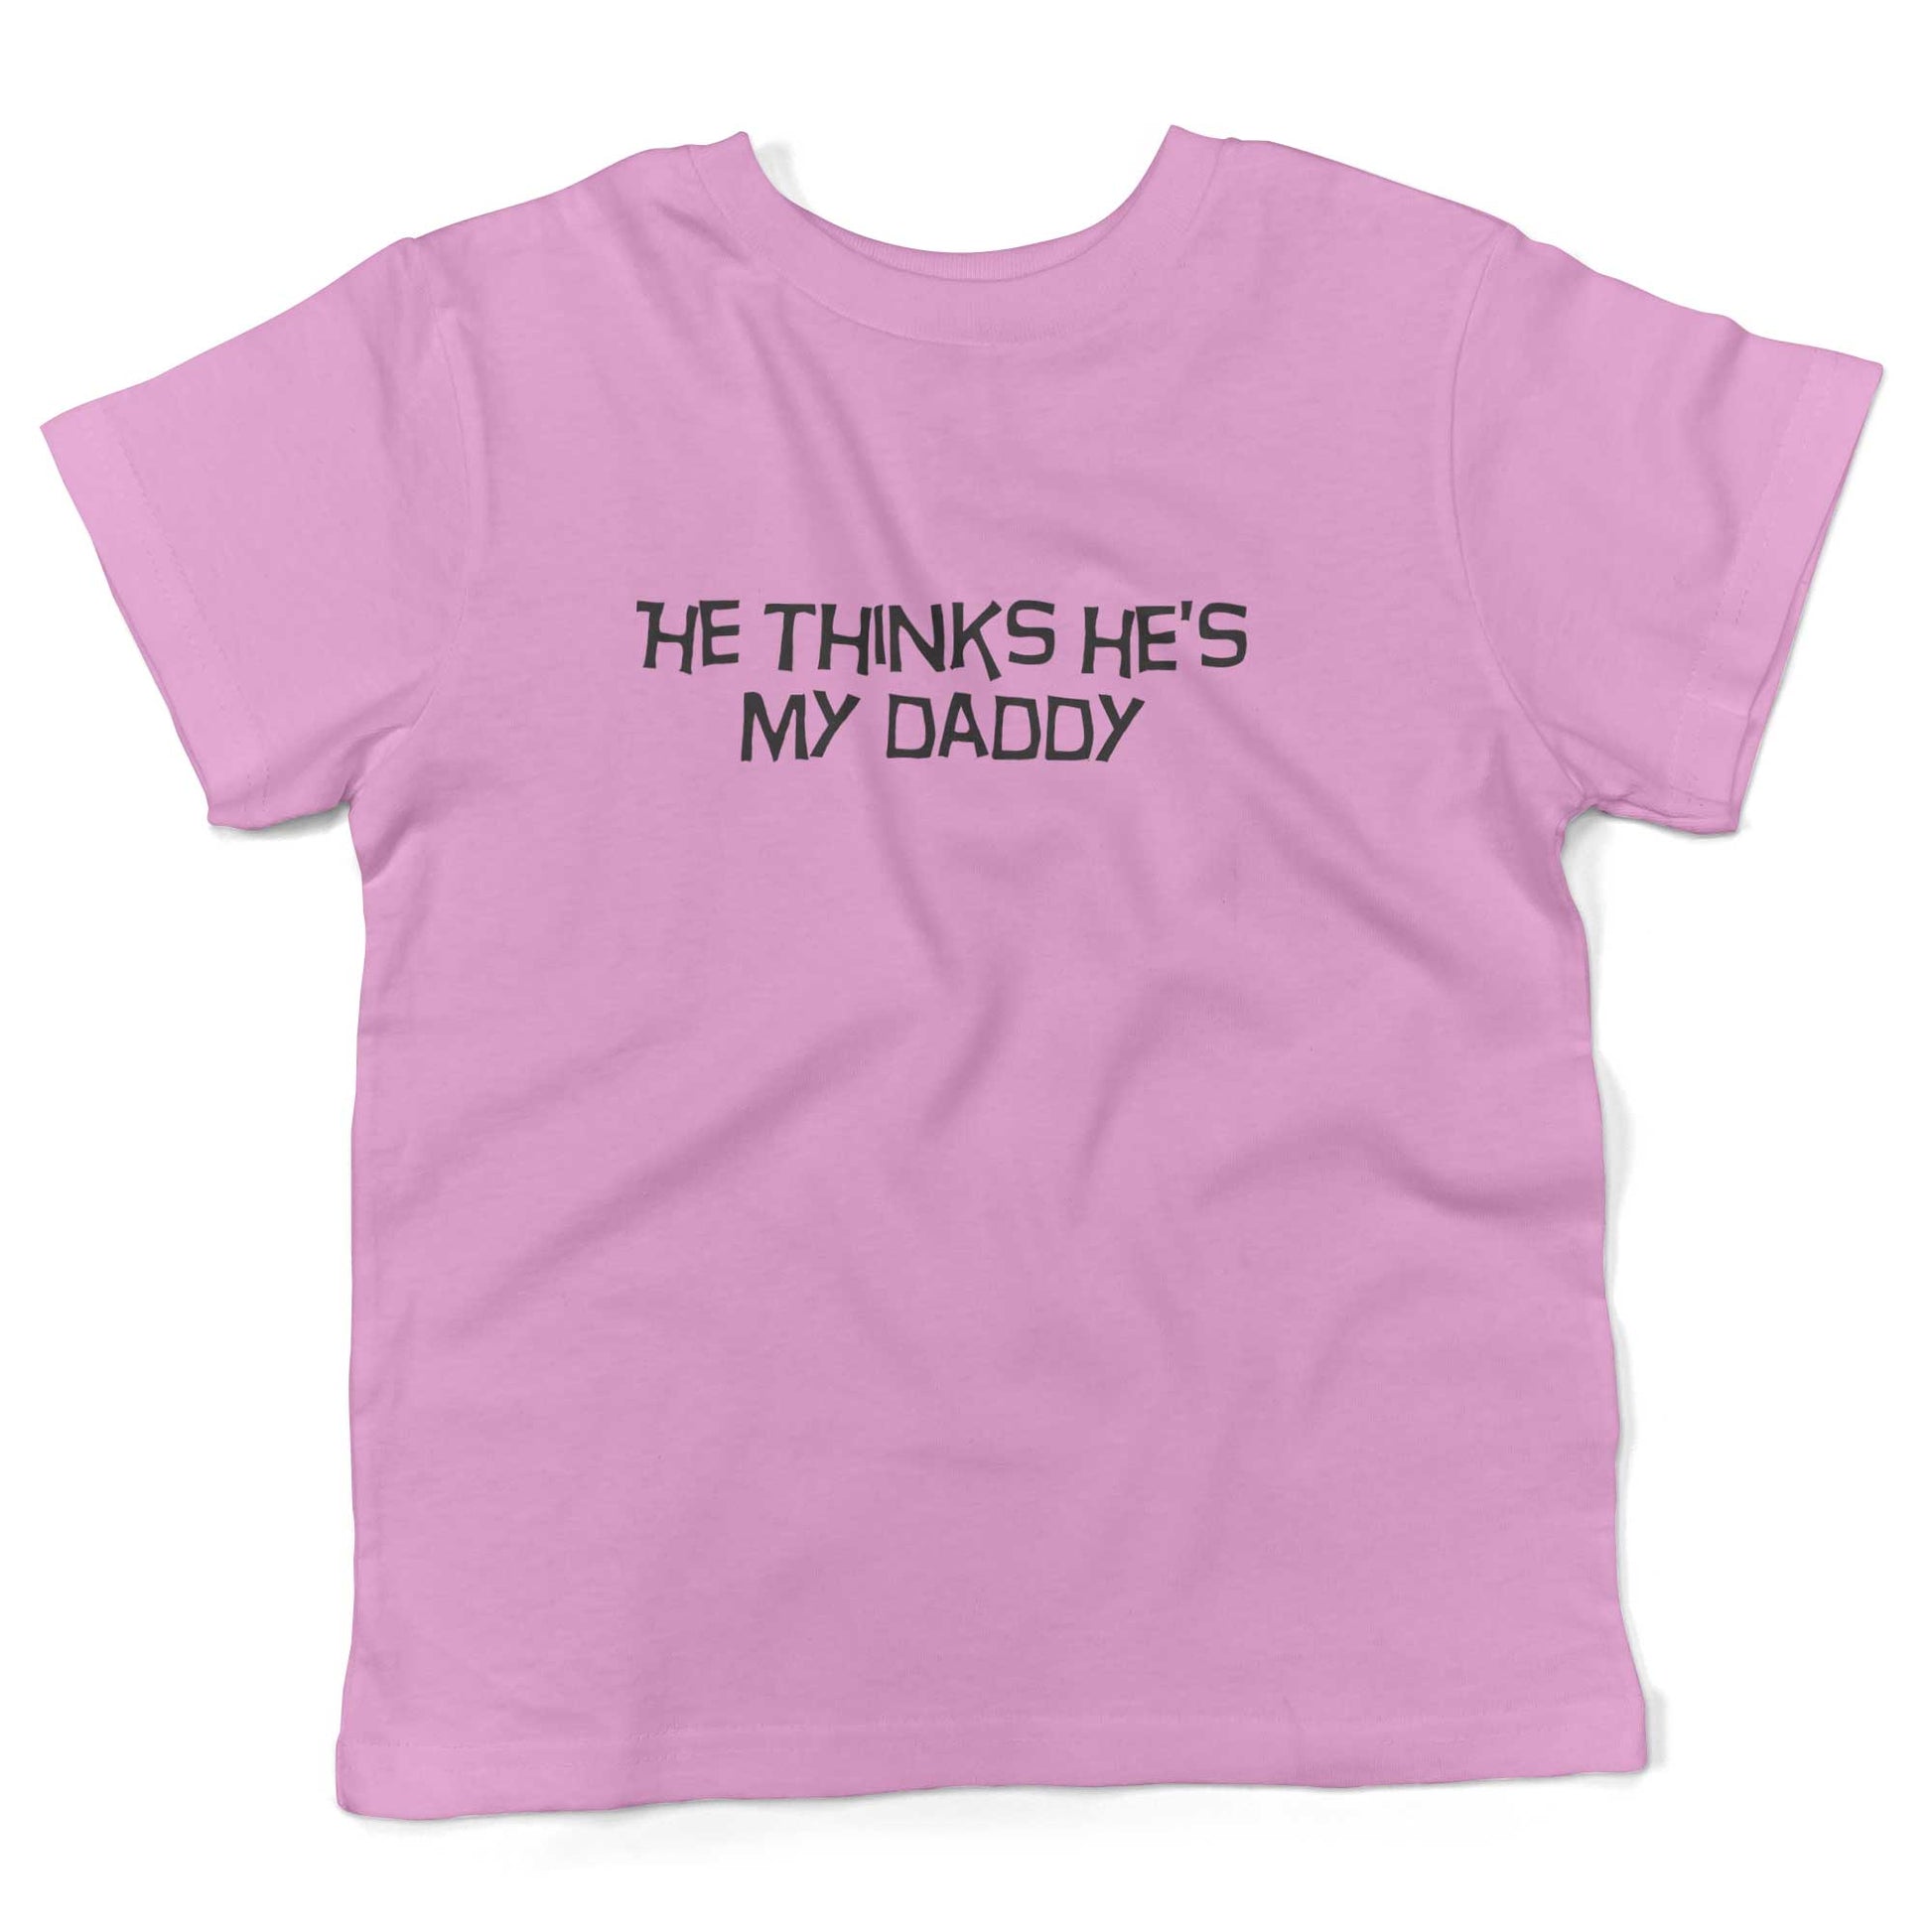 He Thinks He's My Daddy Toddler Shirt-Organic Pink-2T